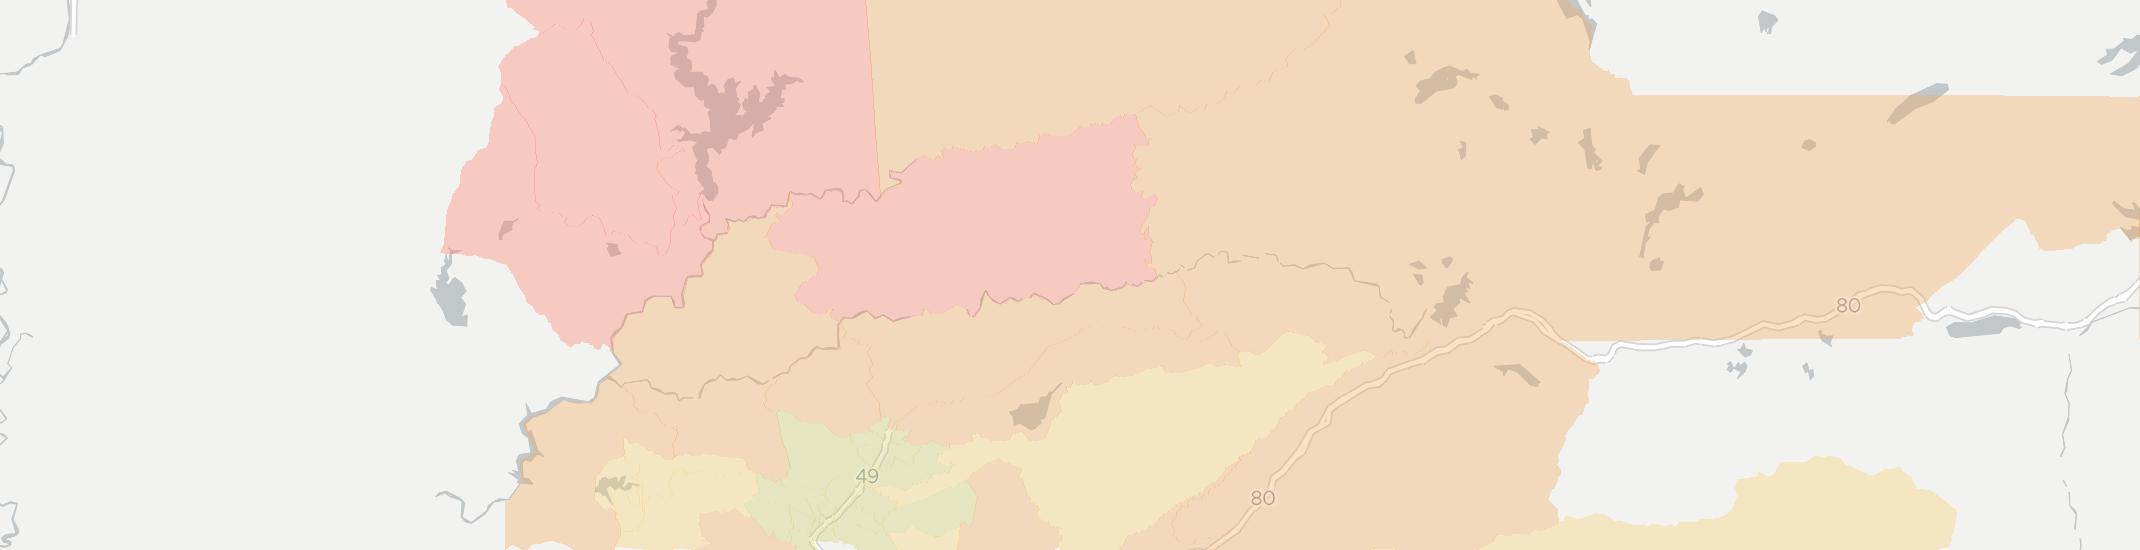 Nevada City Internet Competition Map. Click for interactive map